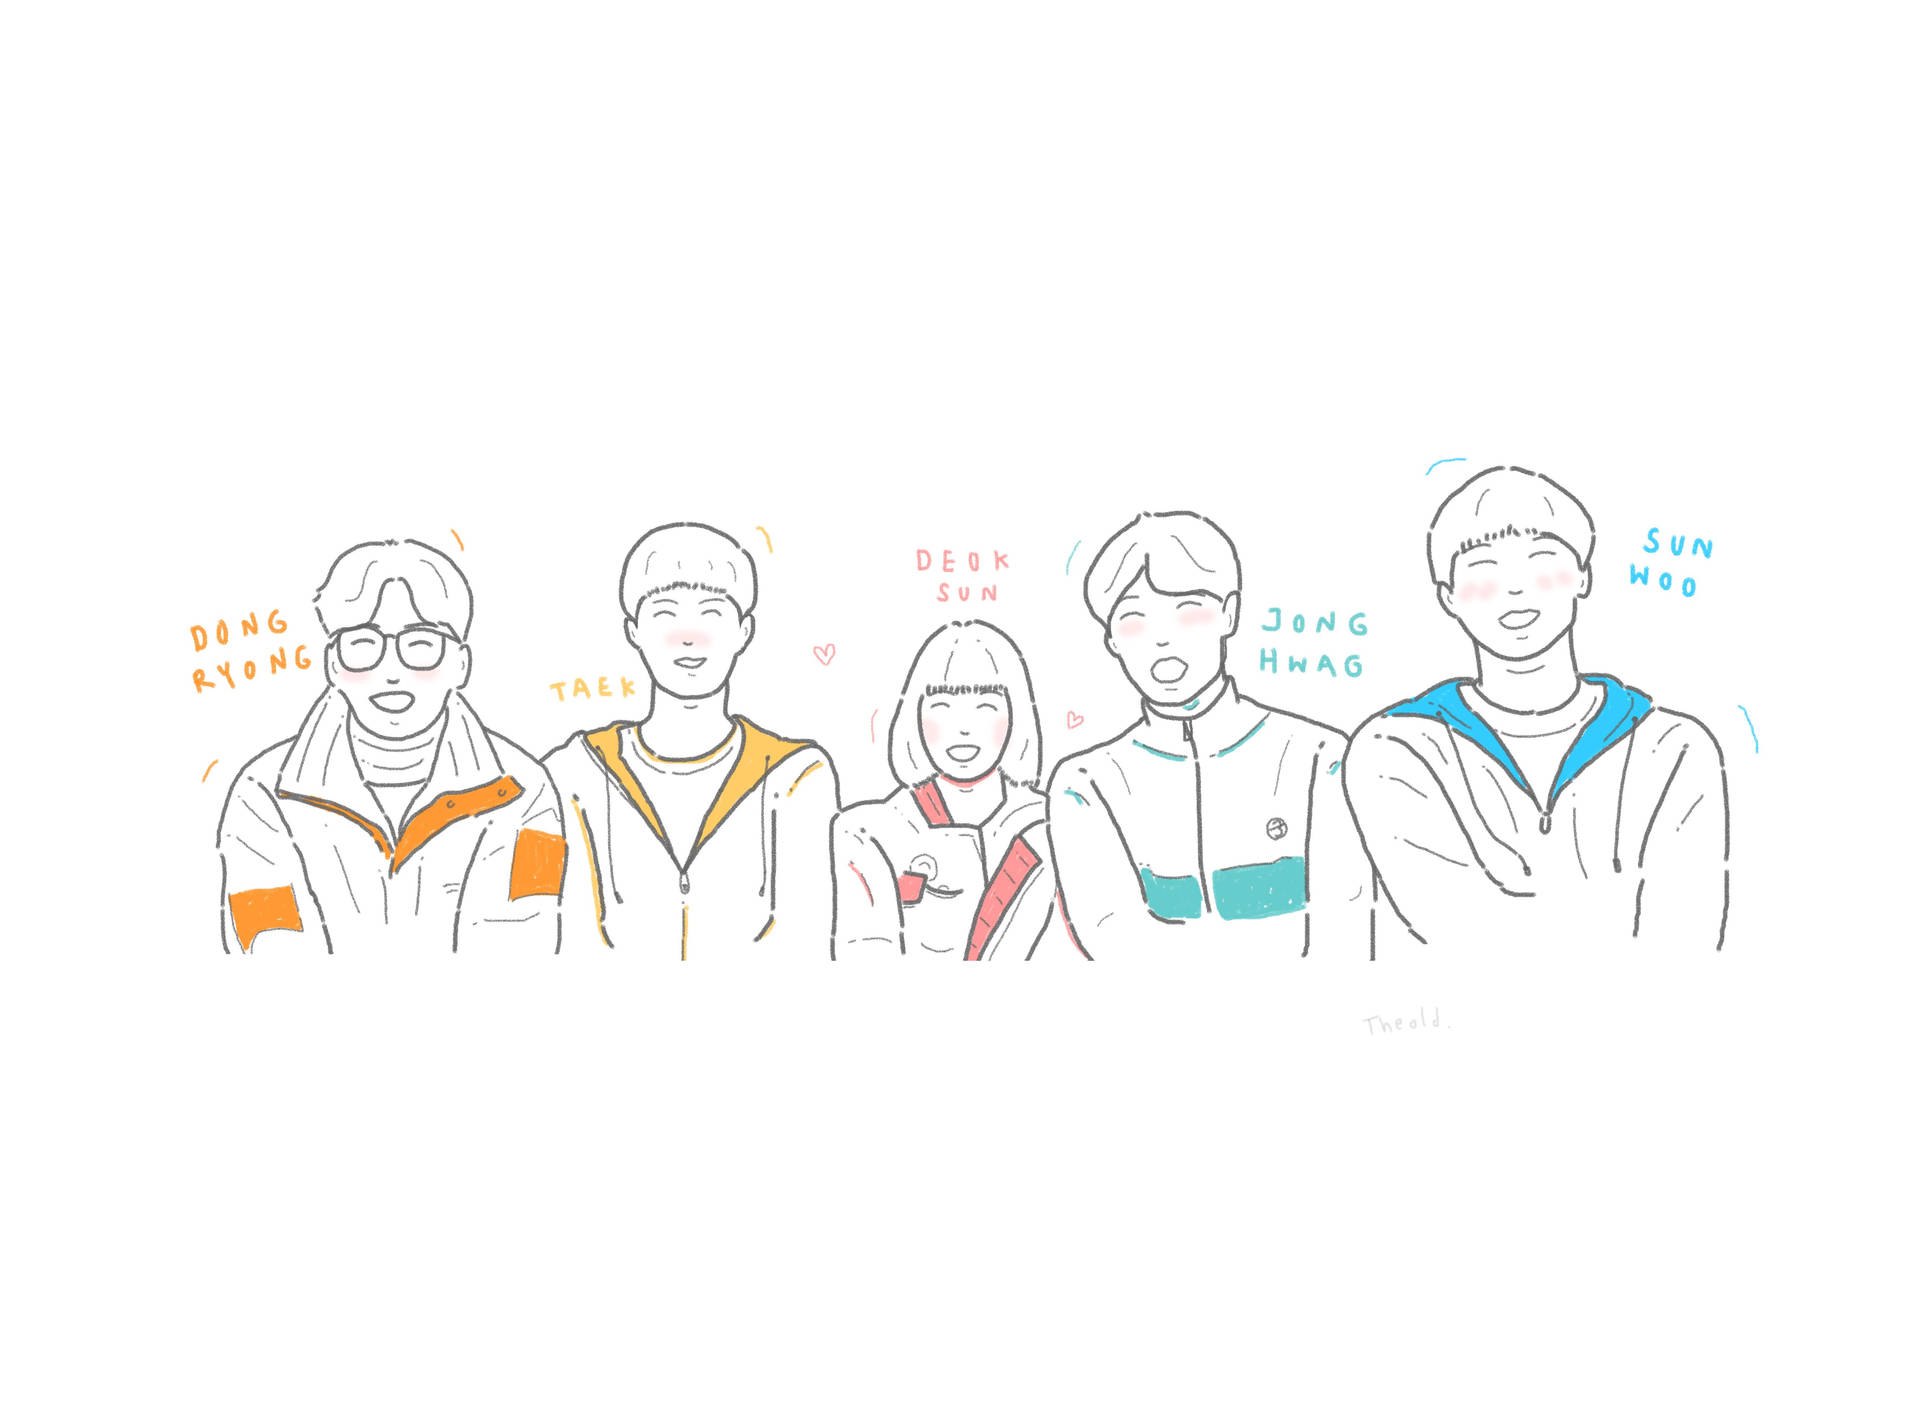 Reply 1988 Adorable Digital Art Background